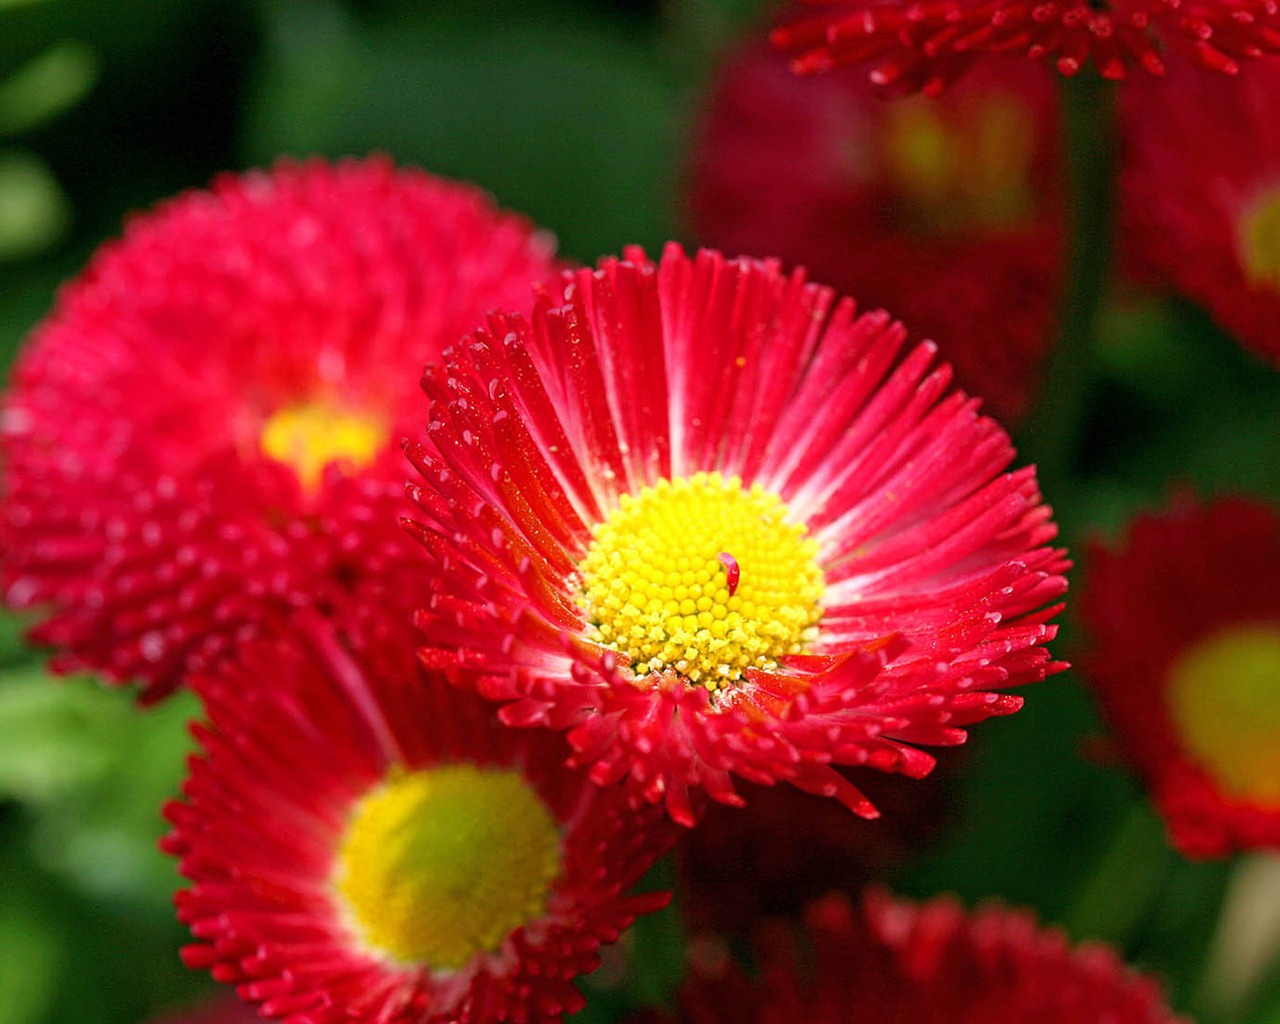 Daisies flowers close-up HD wallpapers #9 - 1280x1024